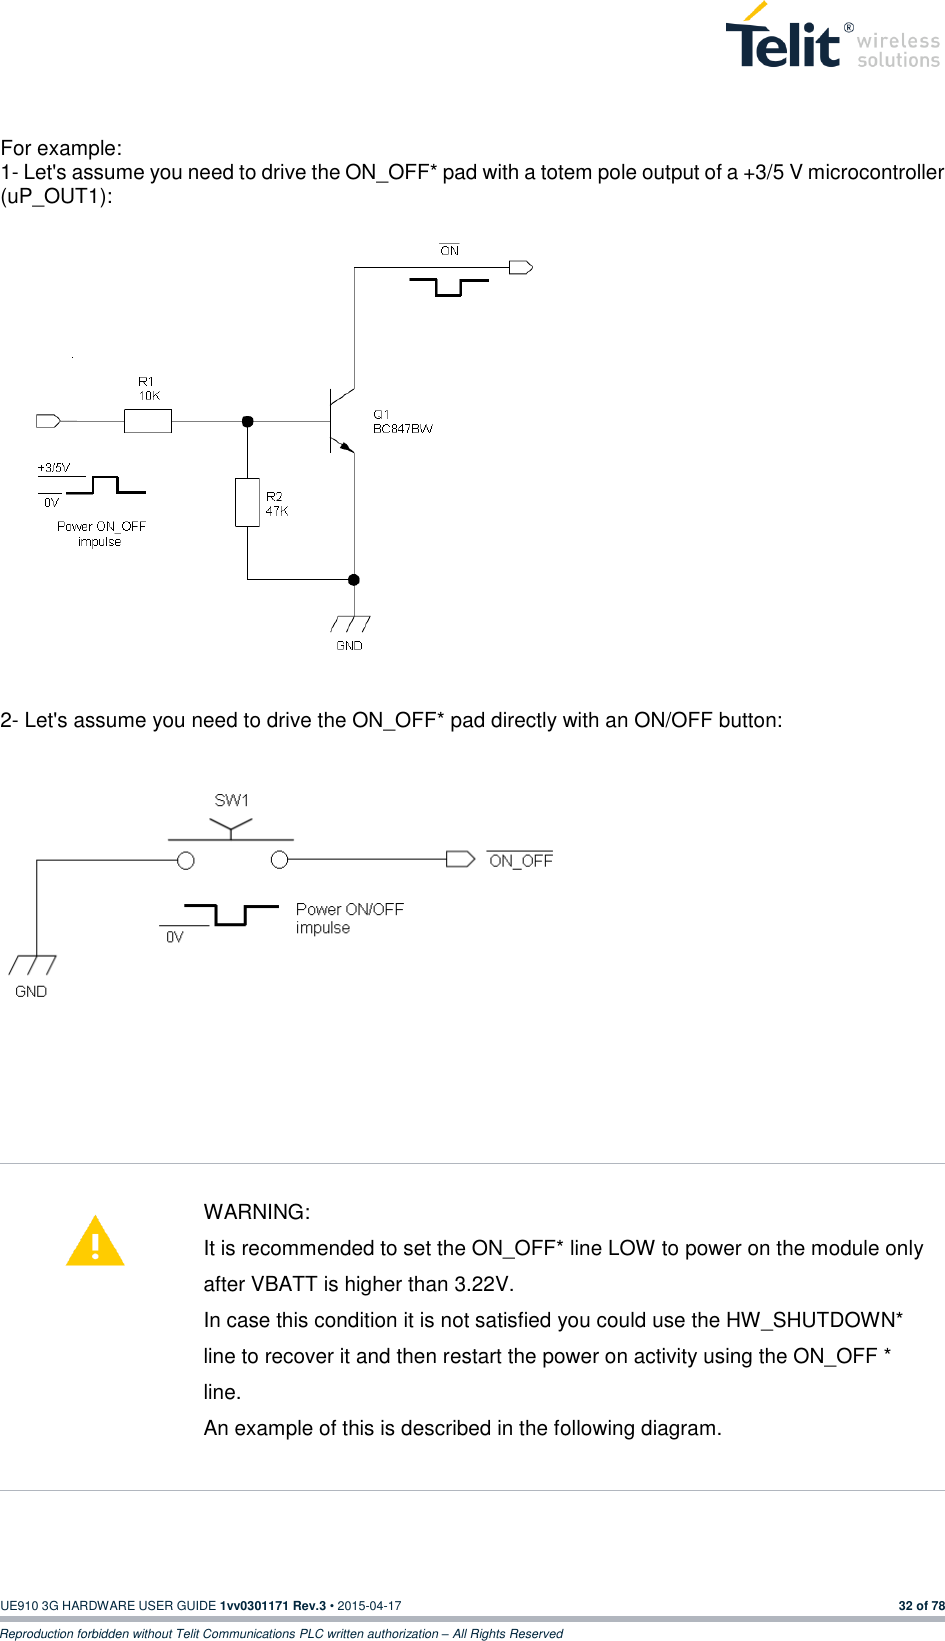  UE910 3G HARDWARE USER GUIDE 1vv0301171 Rev.3 • 2015-04-17 32 of 78 Reproduction forbidden without Telit Communications PLC written authorization – All Rights Reserved  For example: 1- Let&apos;s assume you need to drive the ON_OFF* pad with a totem pole output of a +3/5 V microcontroller (uP_OUT1):               2- Let&apos;s assume you need to drive the ON_OFF* pad directly with an ON/OFF button:              WARNING: It is recommended to set the ON_OFF* line LOW to power on the module only after VBATT is higher than 3.22V. In case this condition it is not satisfied you could use the HW_SHUTDOWN* line to recover it and then restart the power on activity using the ON_OFF * line. An example of this is described in the following diagram.     